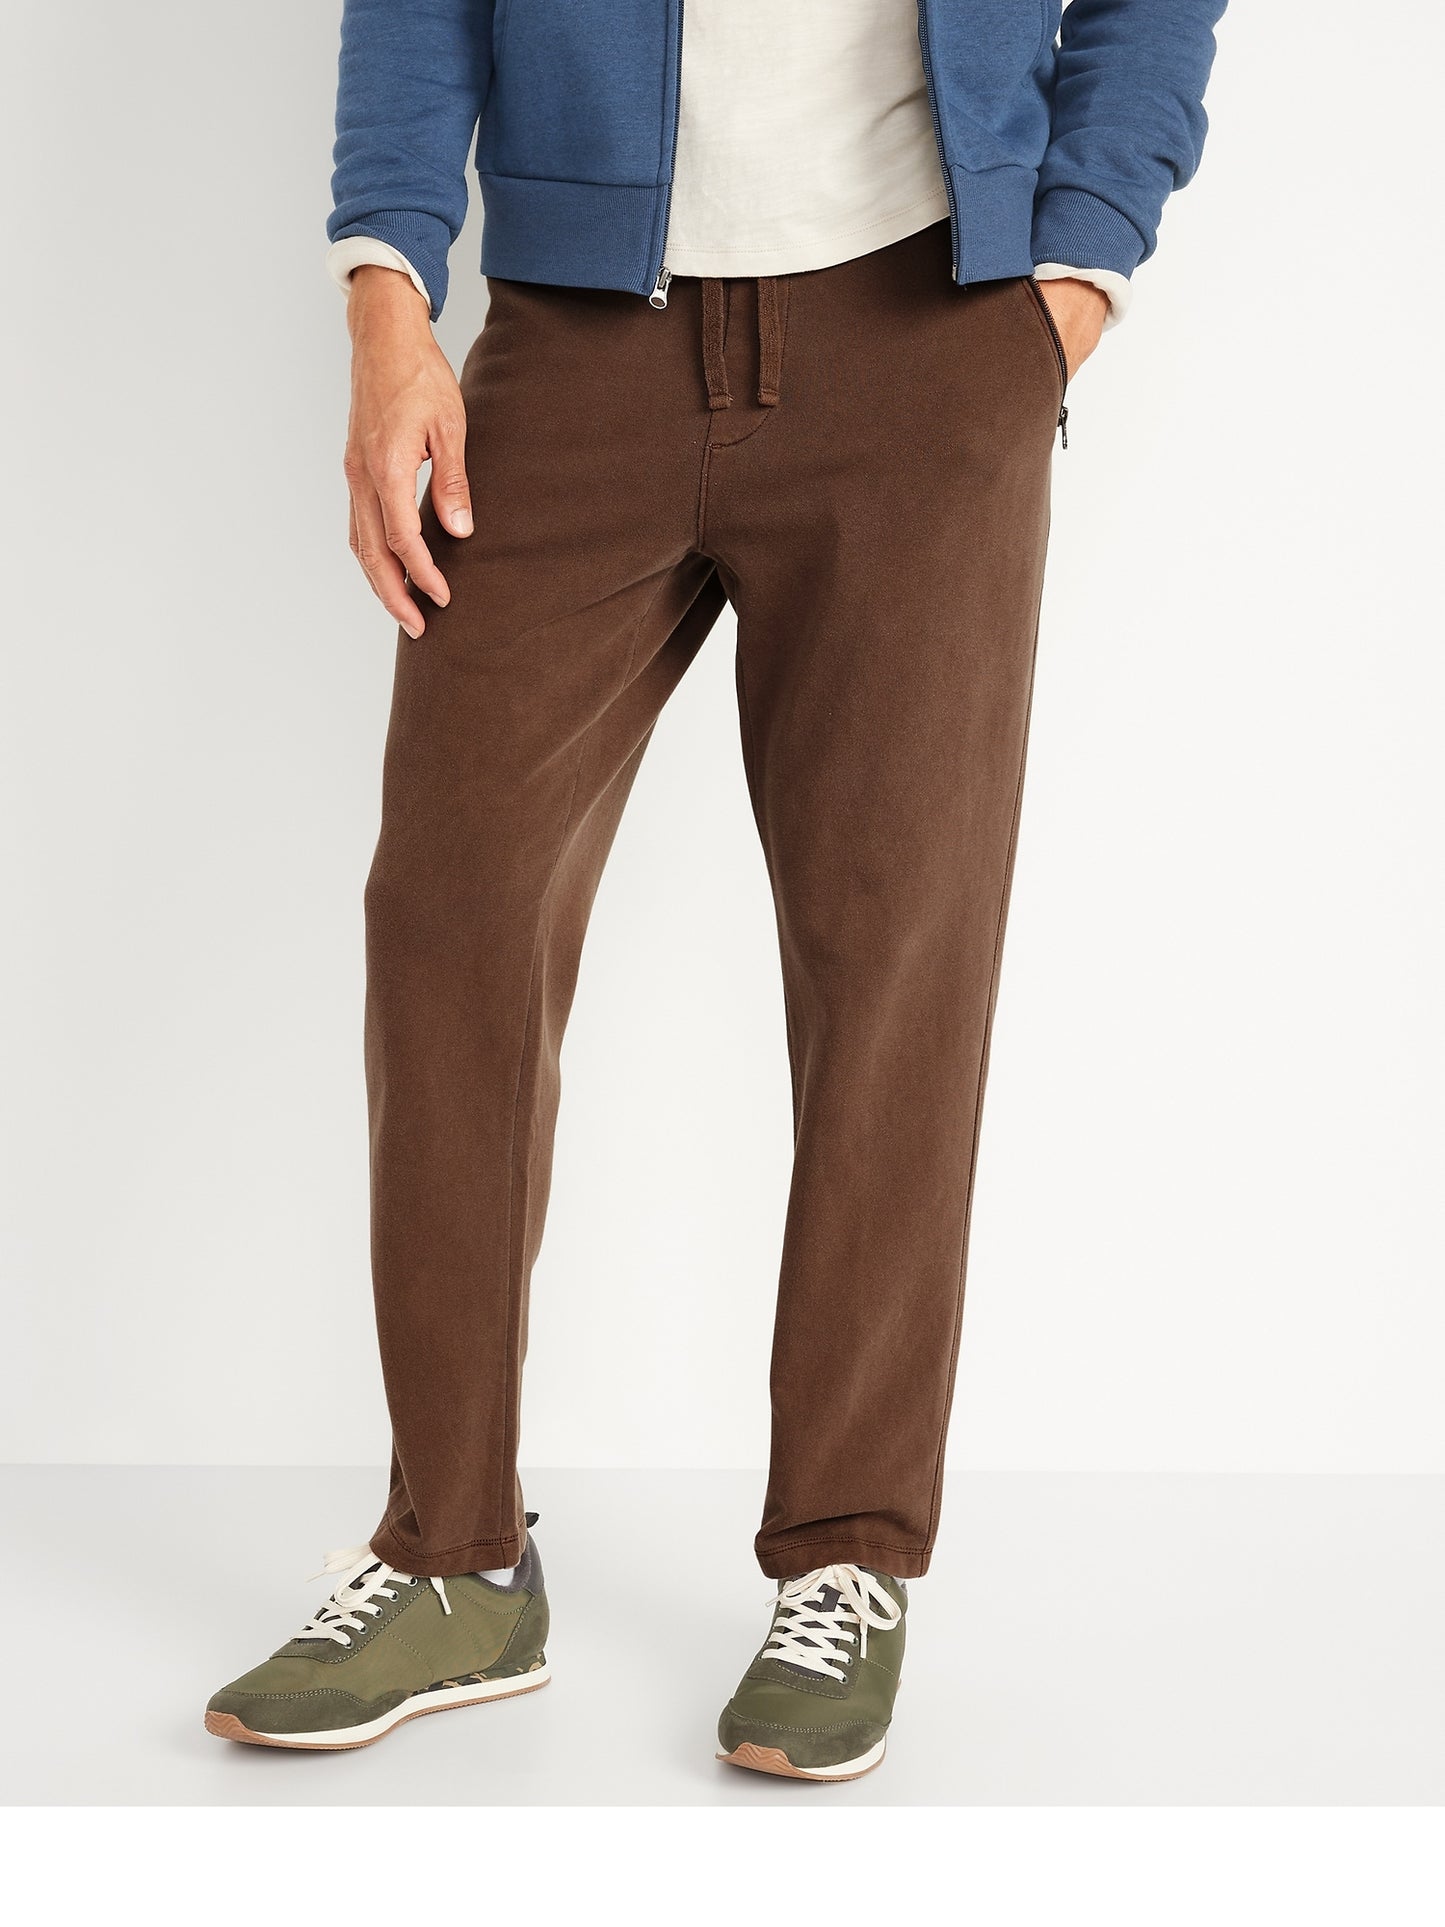 ON Garment-Dyed Zip-Pocket Tapered Sweatpants For Men - Tawny Brown